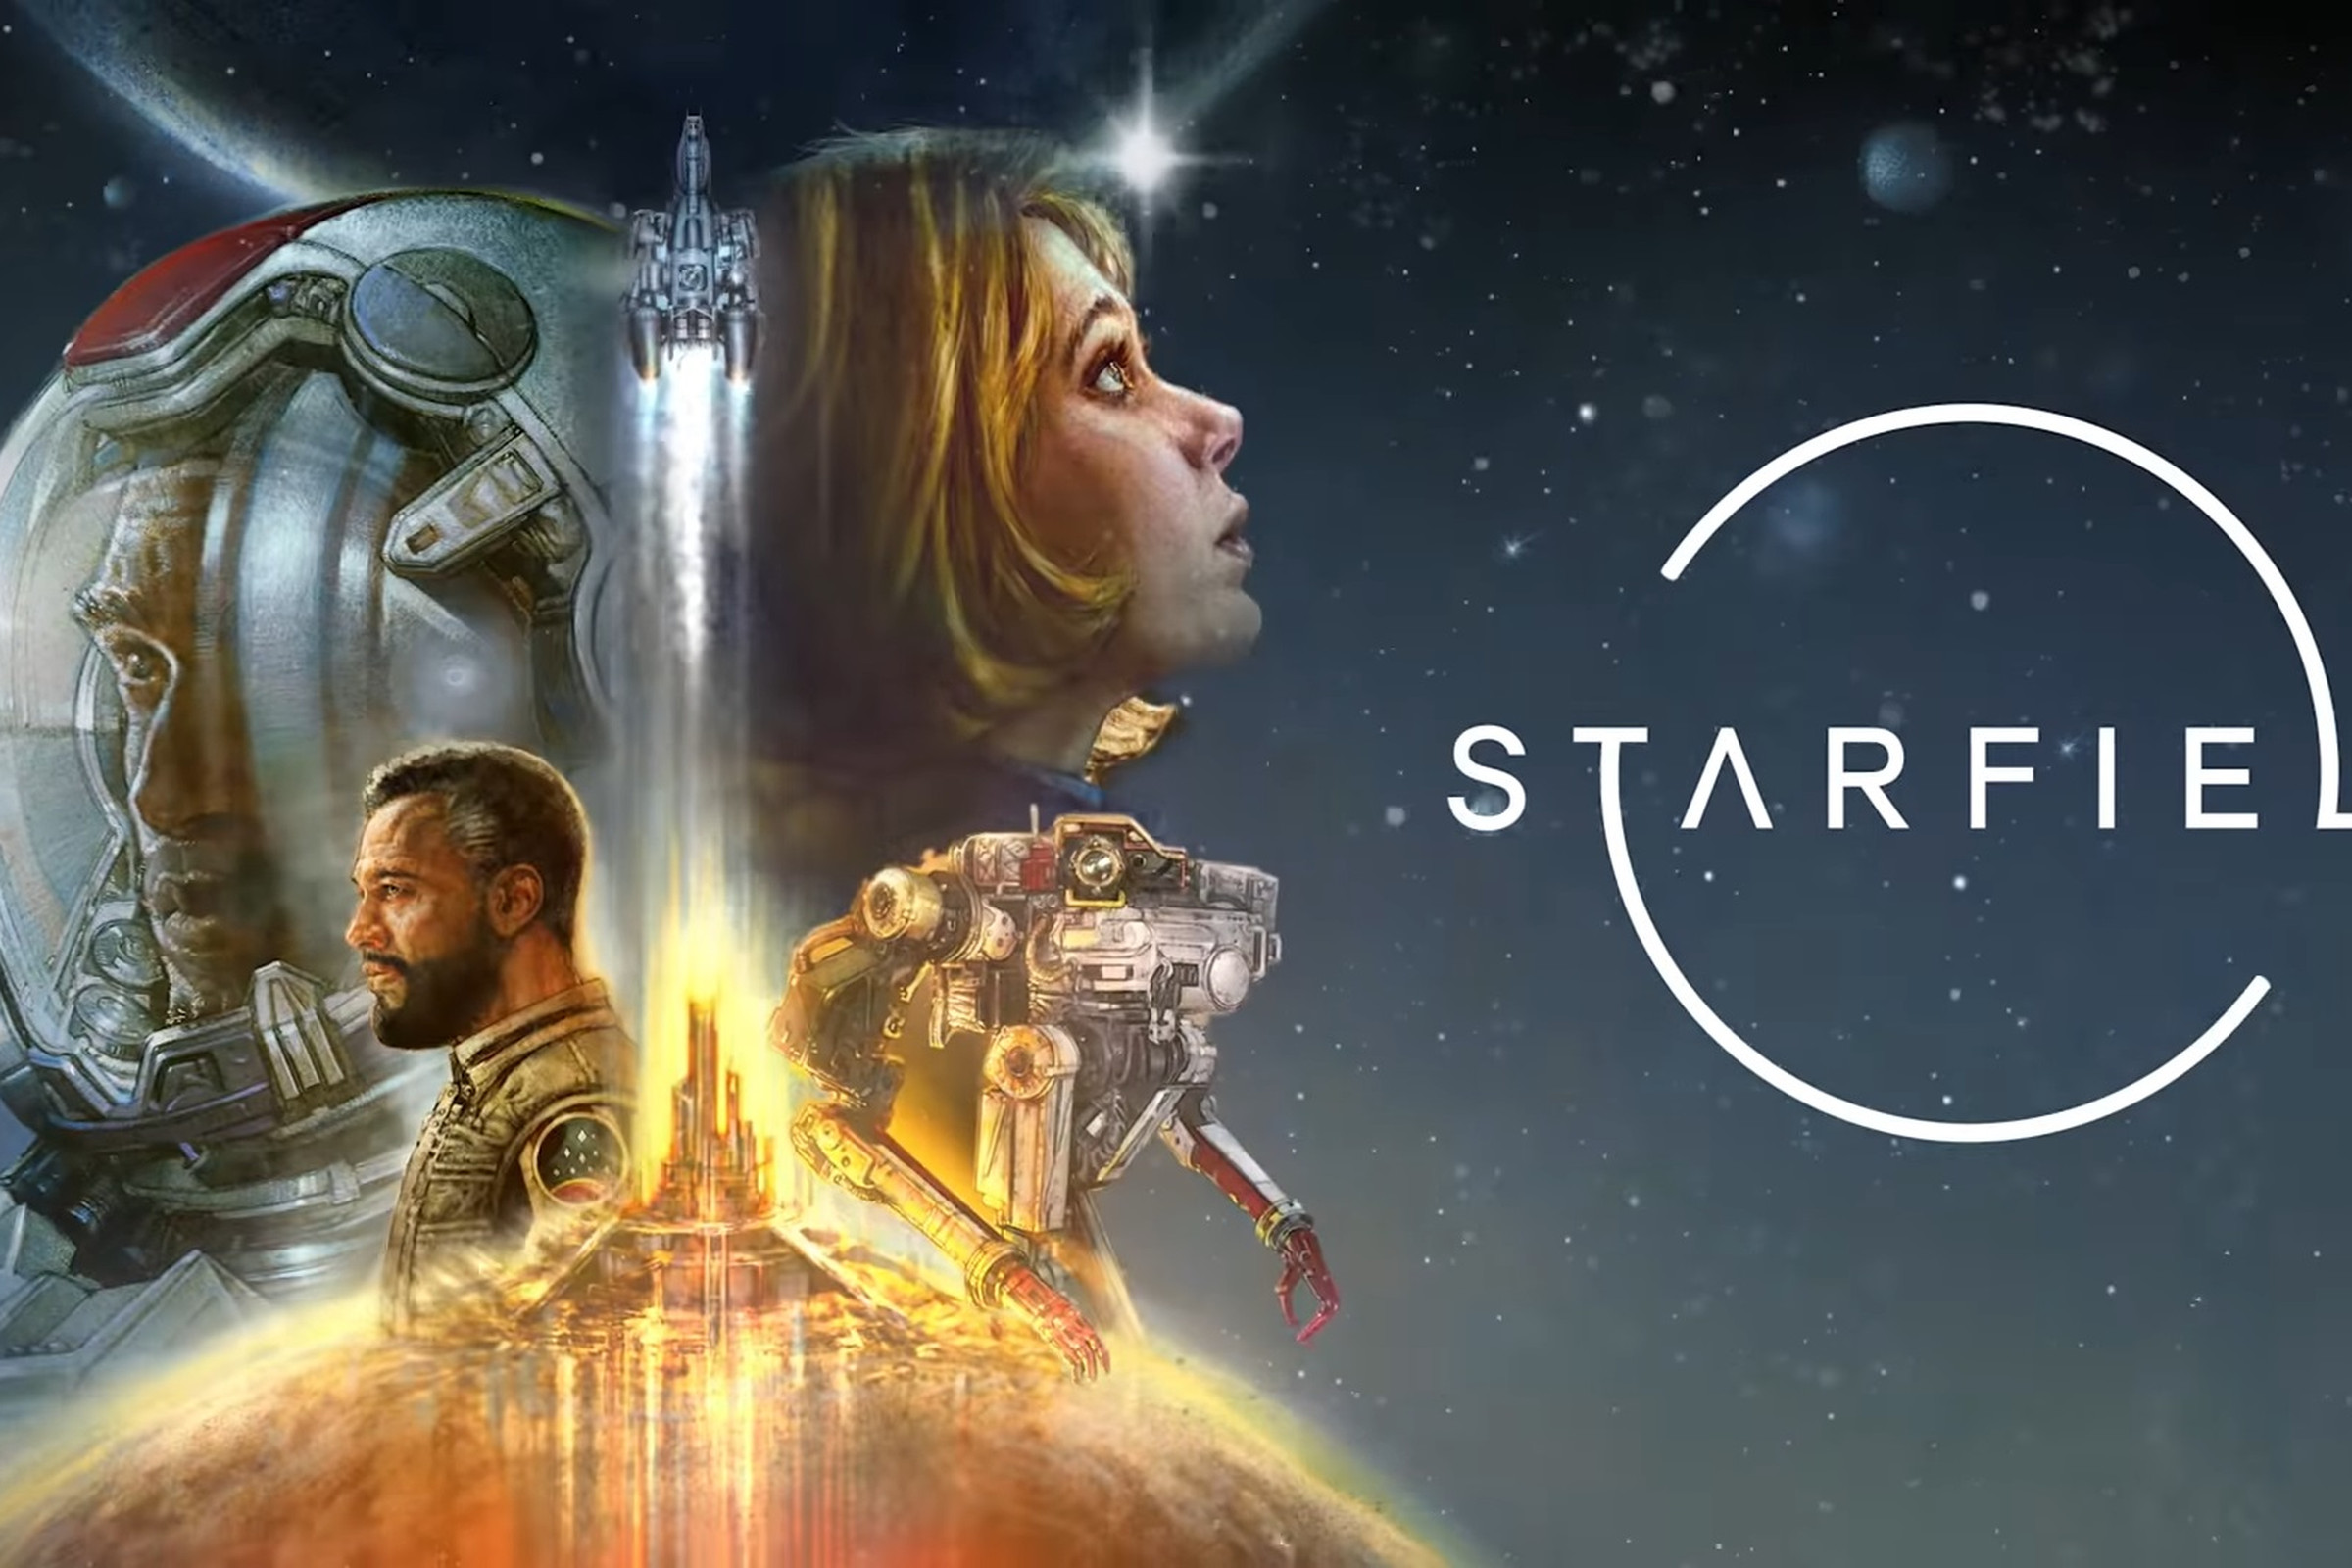 Key art from Starfield featuring the game’s logo and an assortment of faces looking up and rockets and spaceships